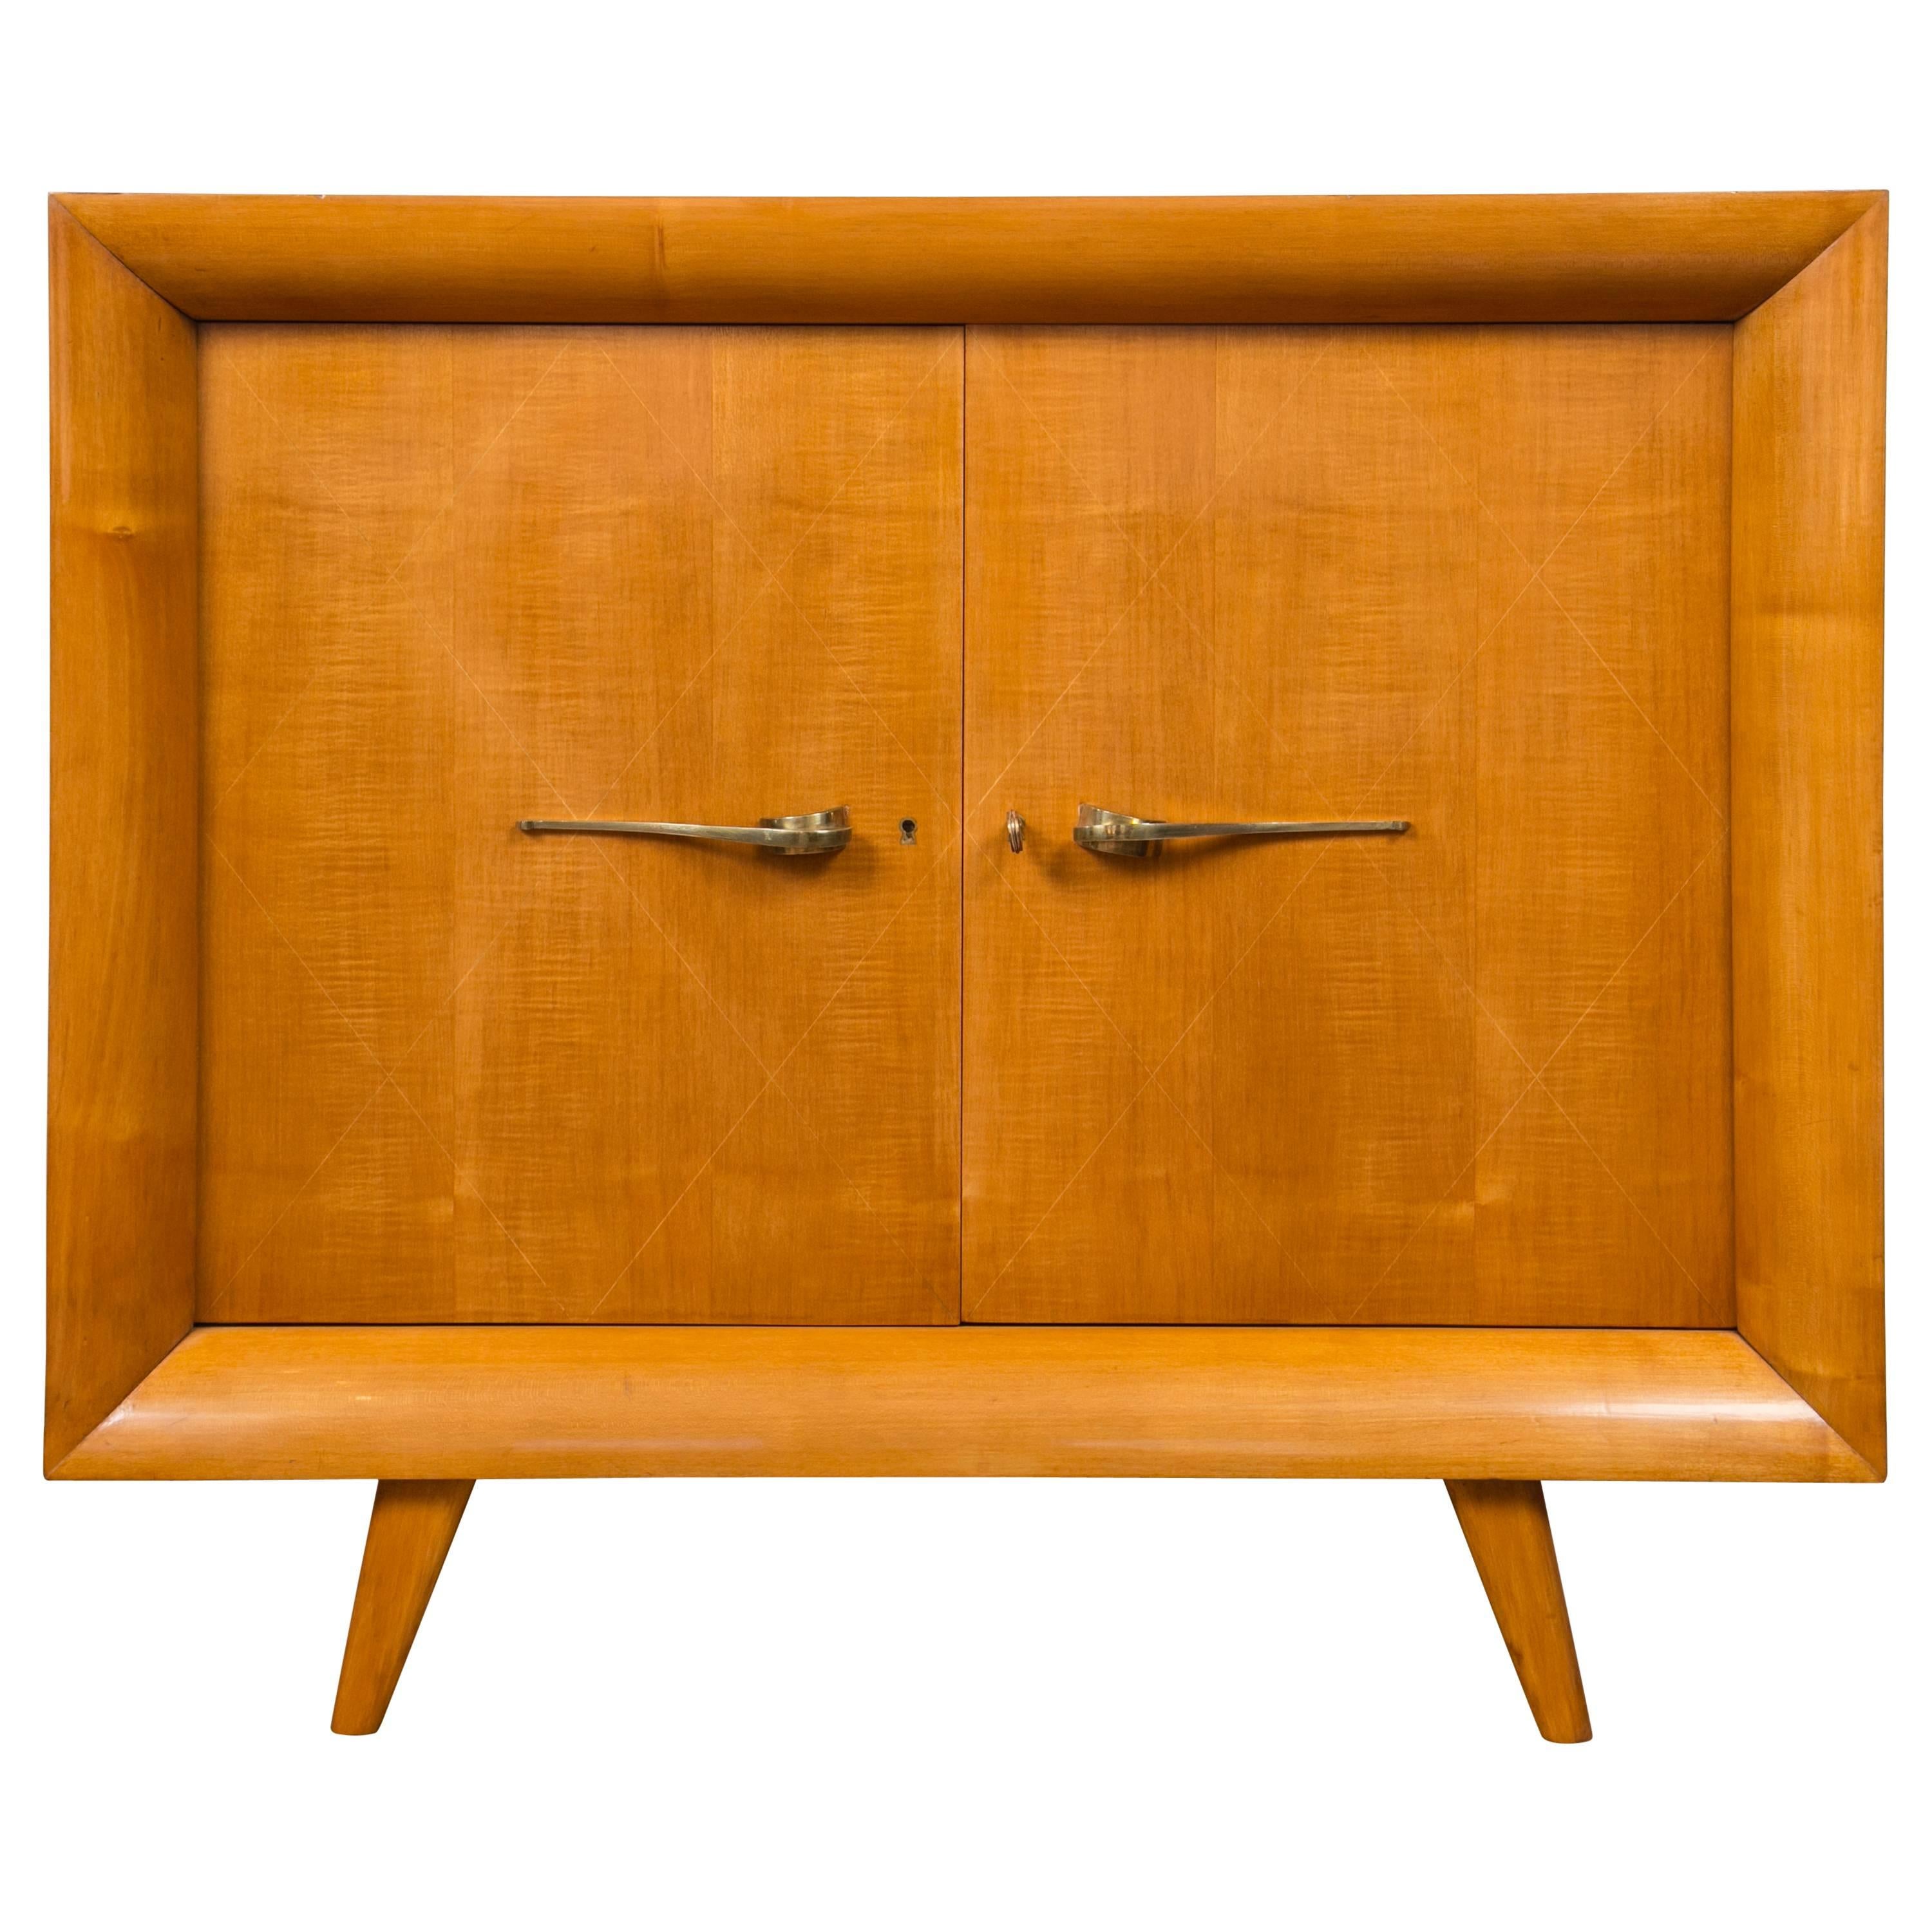 French Modernist Cabinet by Suzanne Guiguichon For Sale